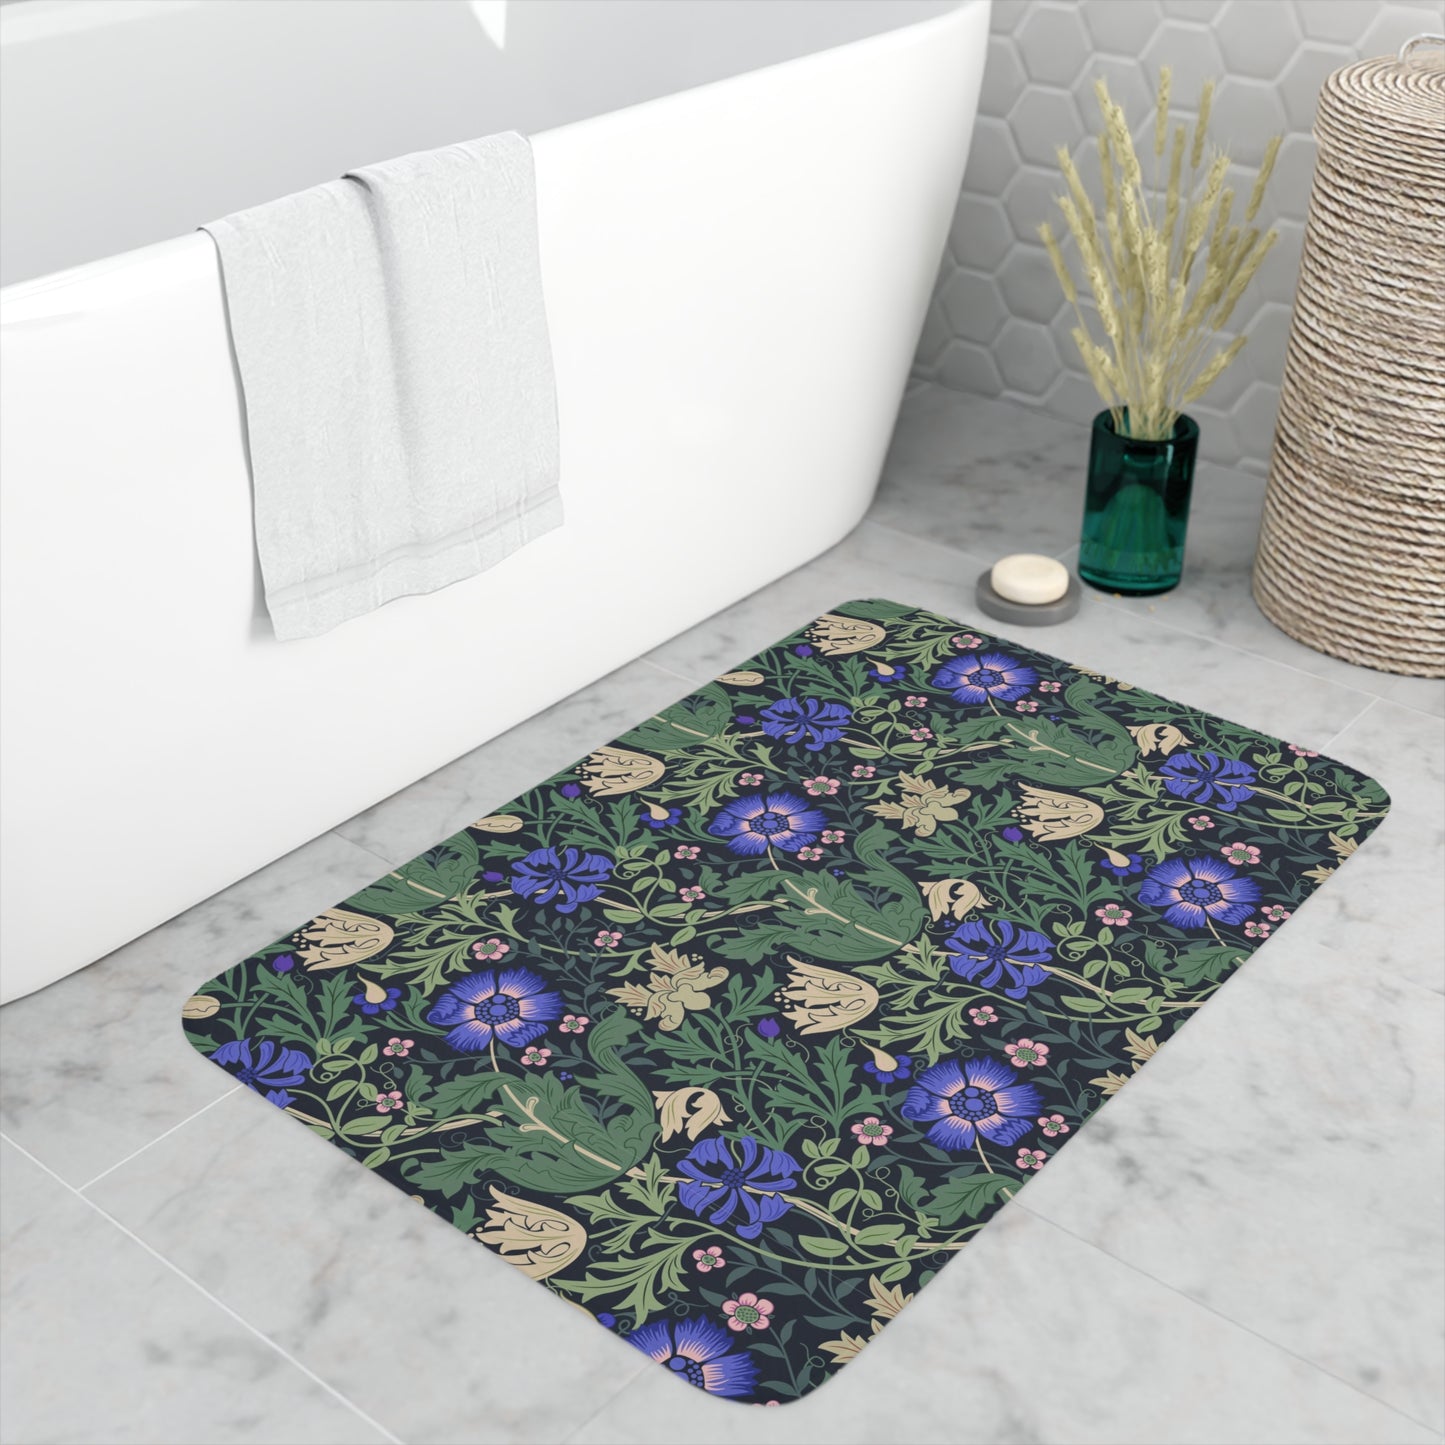 william-morris-co-memory-foam-bath-mat-compton-collection-bluebell-cottage-4